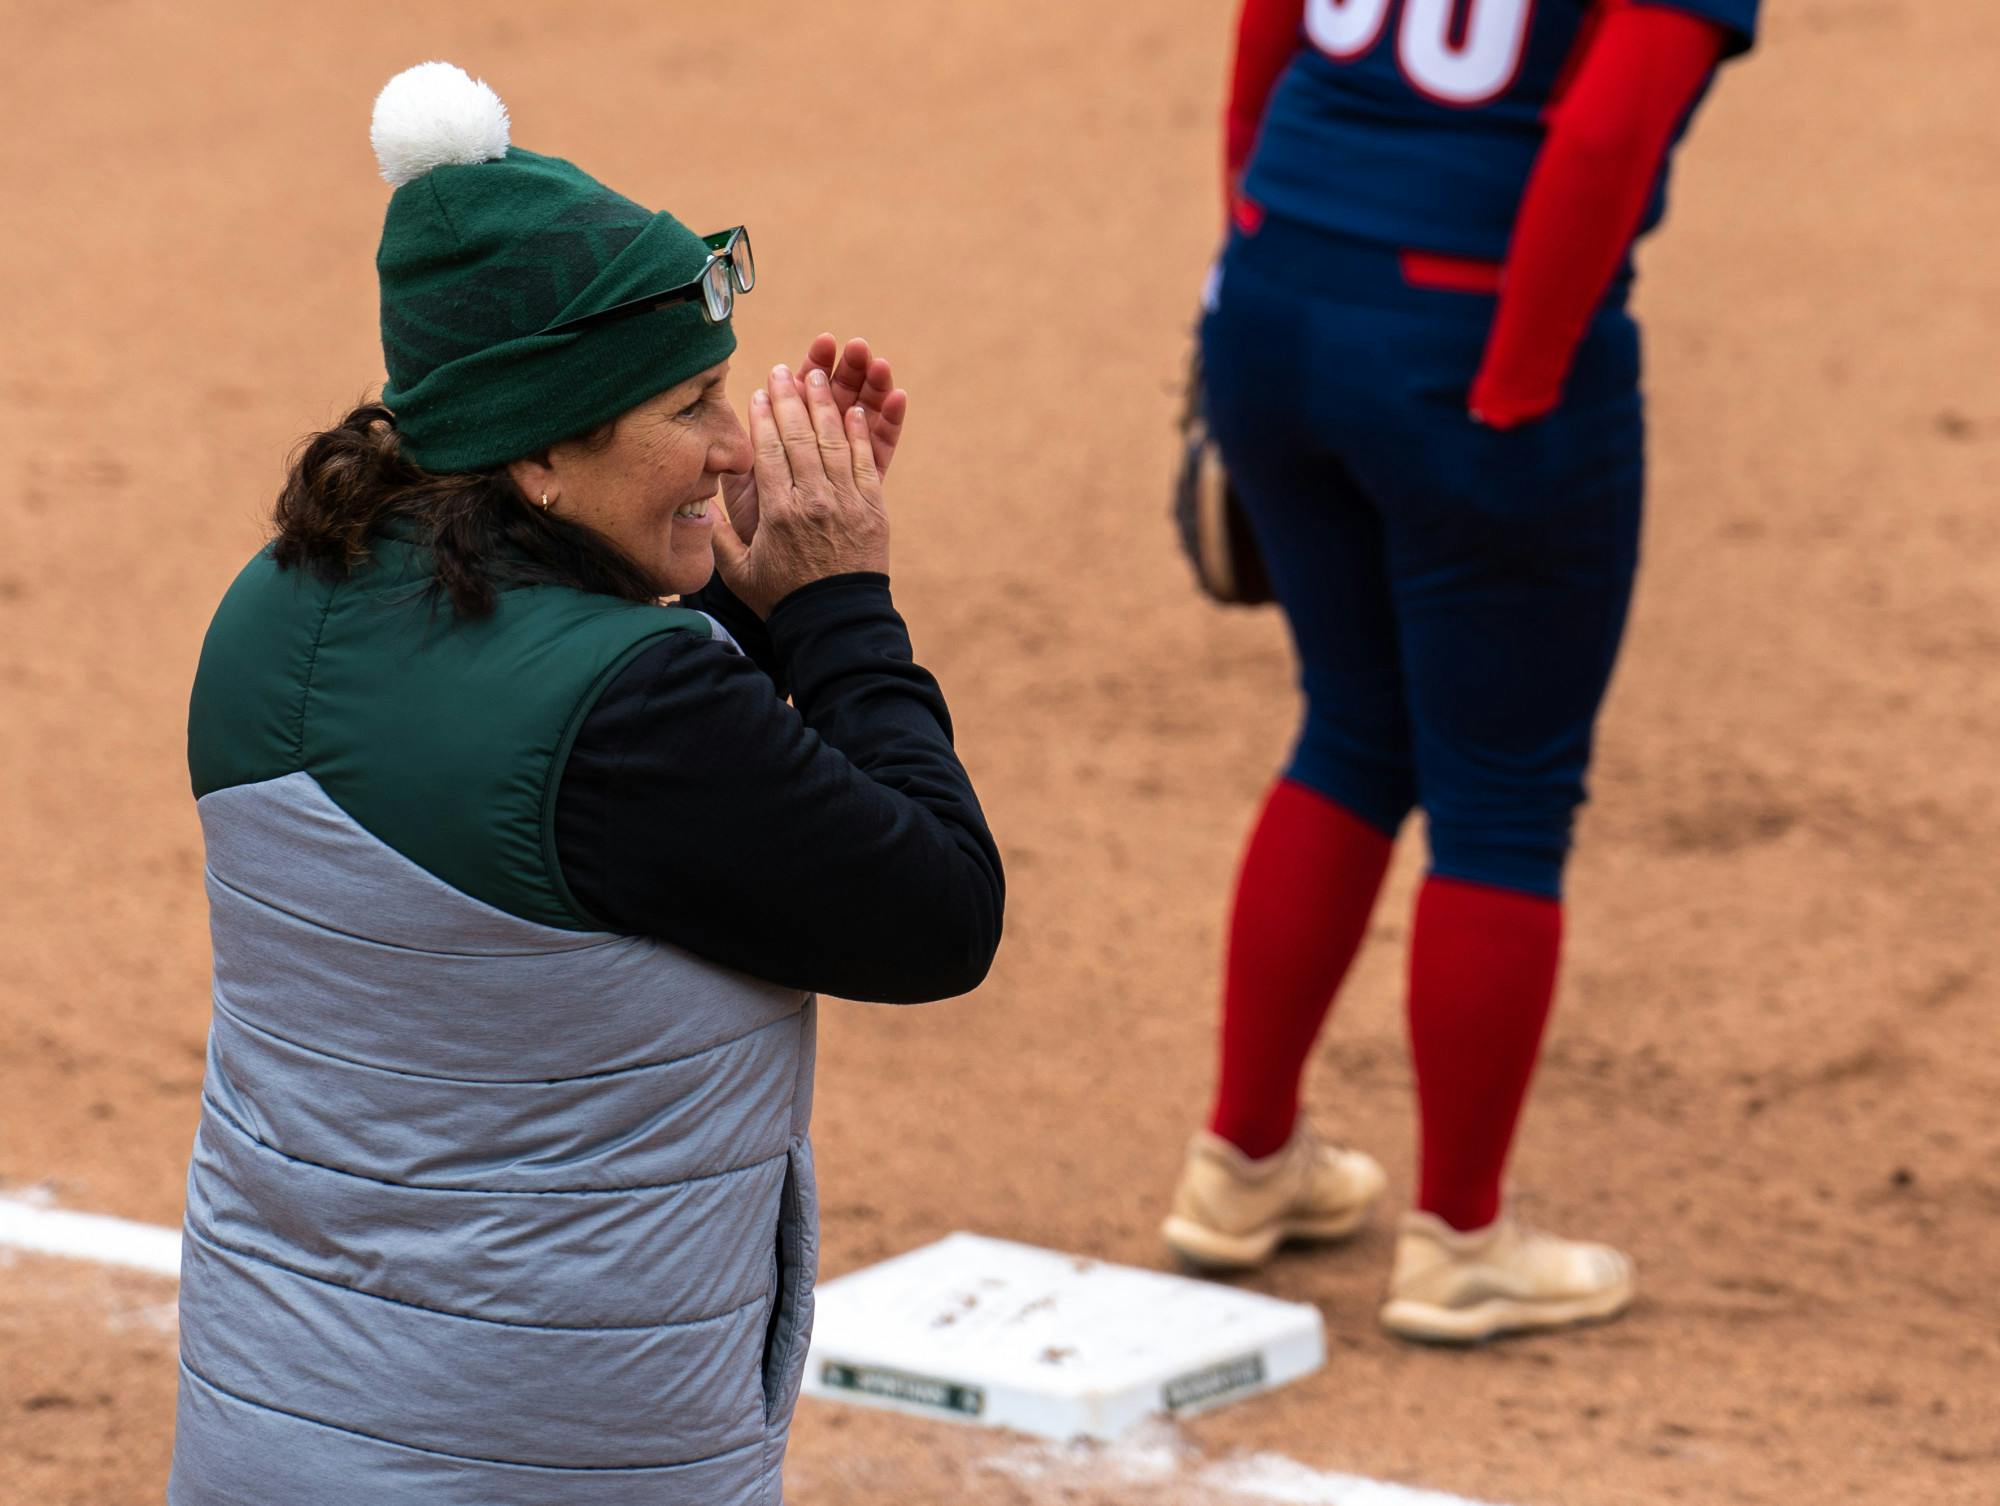 <p>MSU coach Jacquie Joseph claps as a player gets on base during the sixth inning. The Spartans shut out the Titans, 2-0, in the first game of their doubleheader on March 29, 2022. </p>